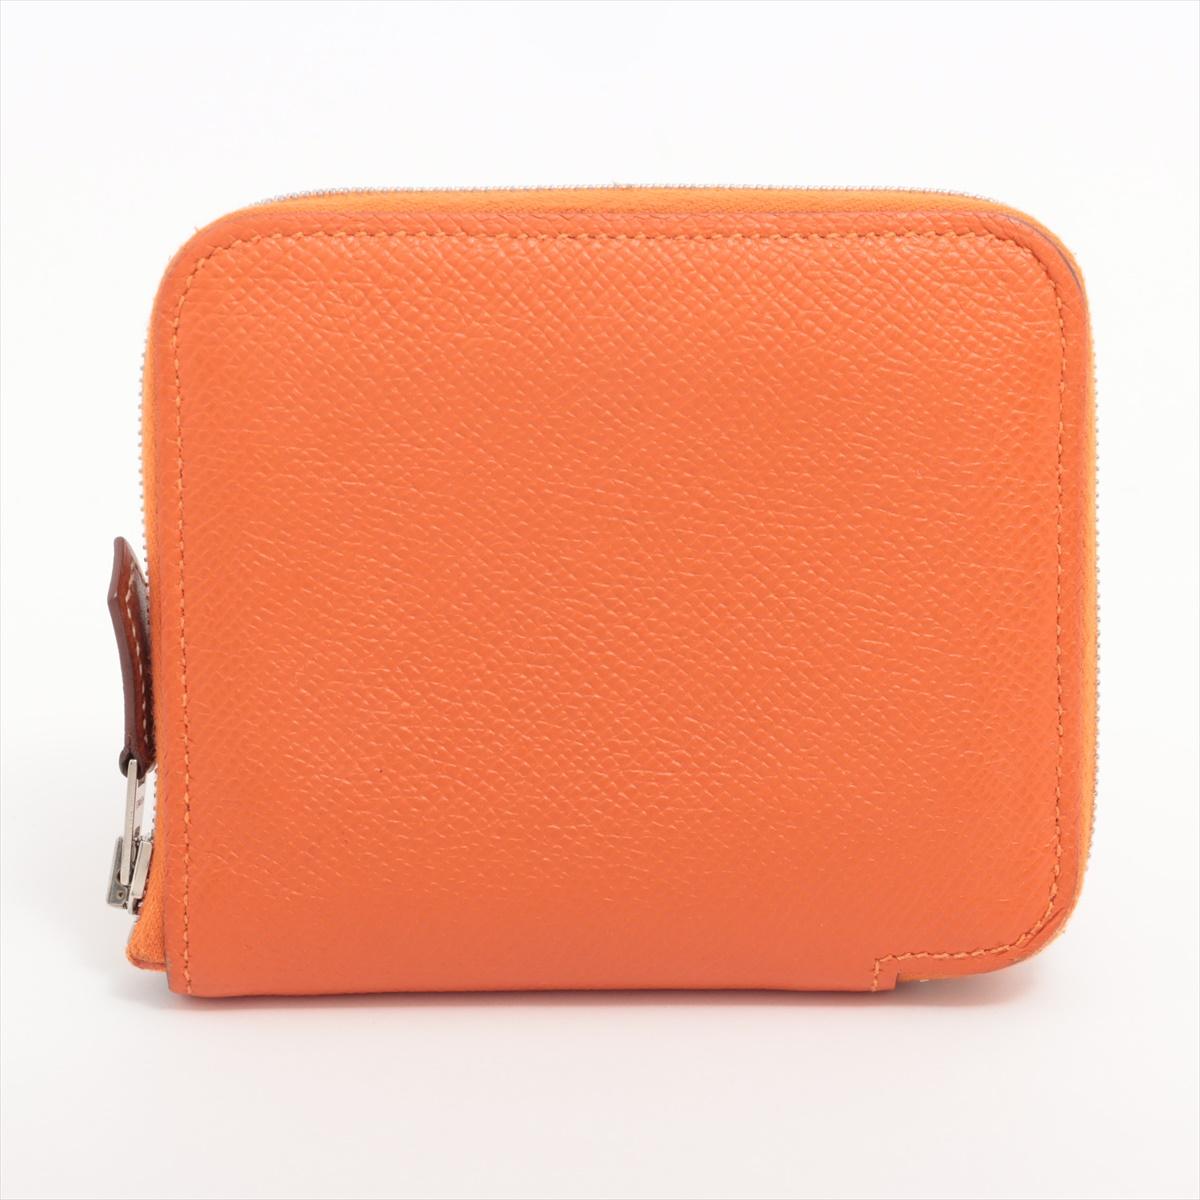 The Hermès Zip Around Compact Coin Case in Orange a compact and vibrant accessory that effortlessly combines luxury with practical design. Meticulously crafted from smooth leather. The bold orange hue adds a touch of vibrancy to the sleek